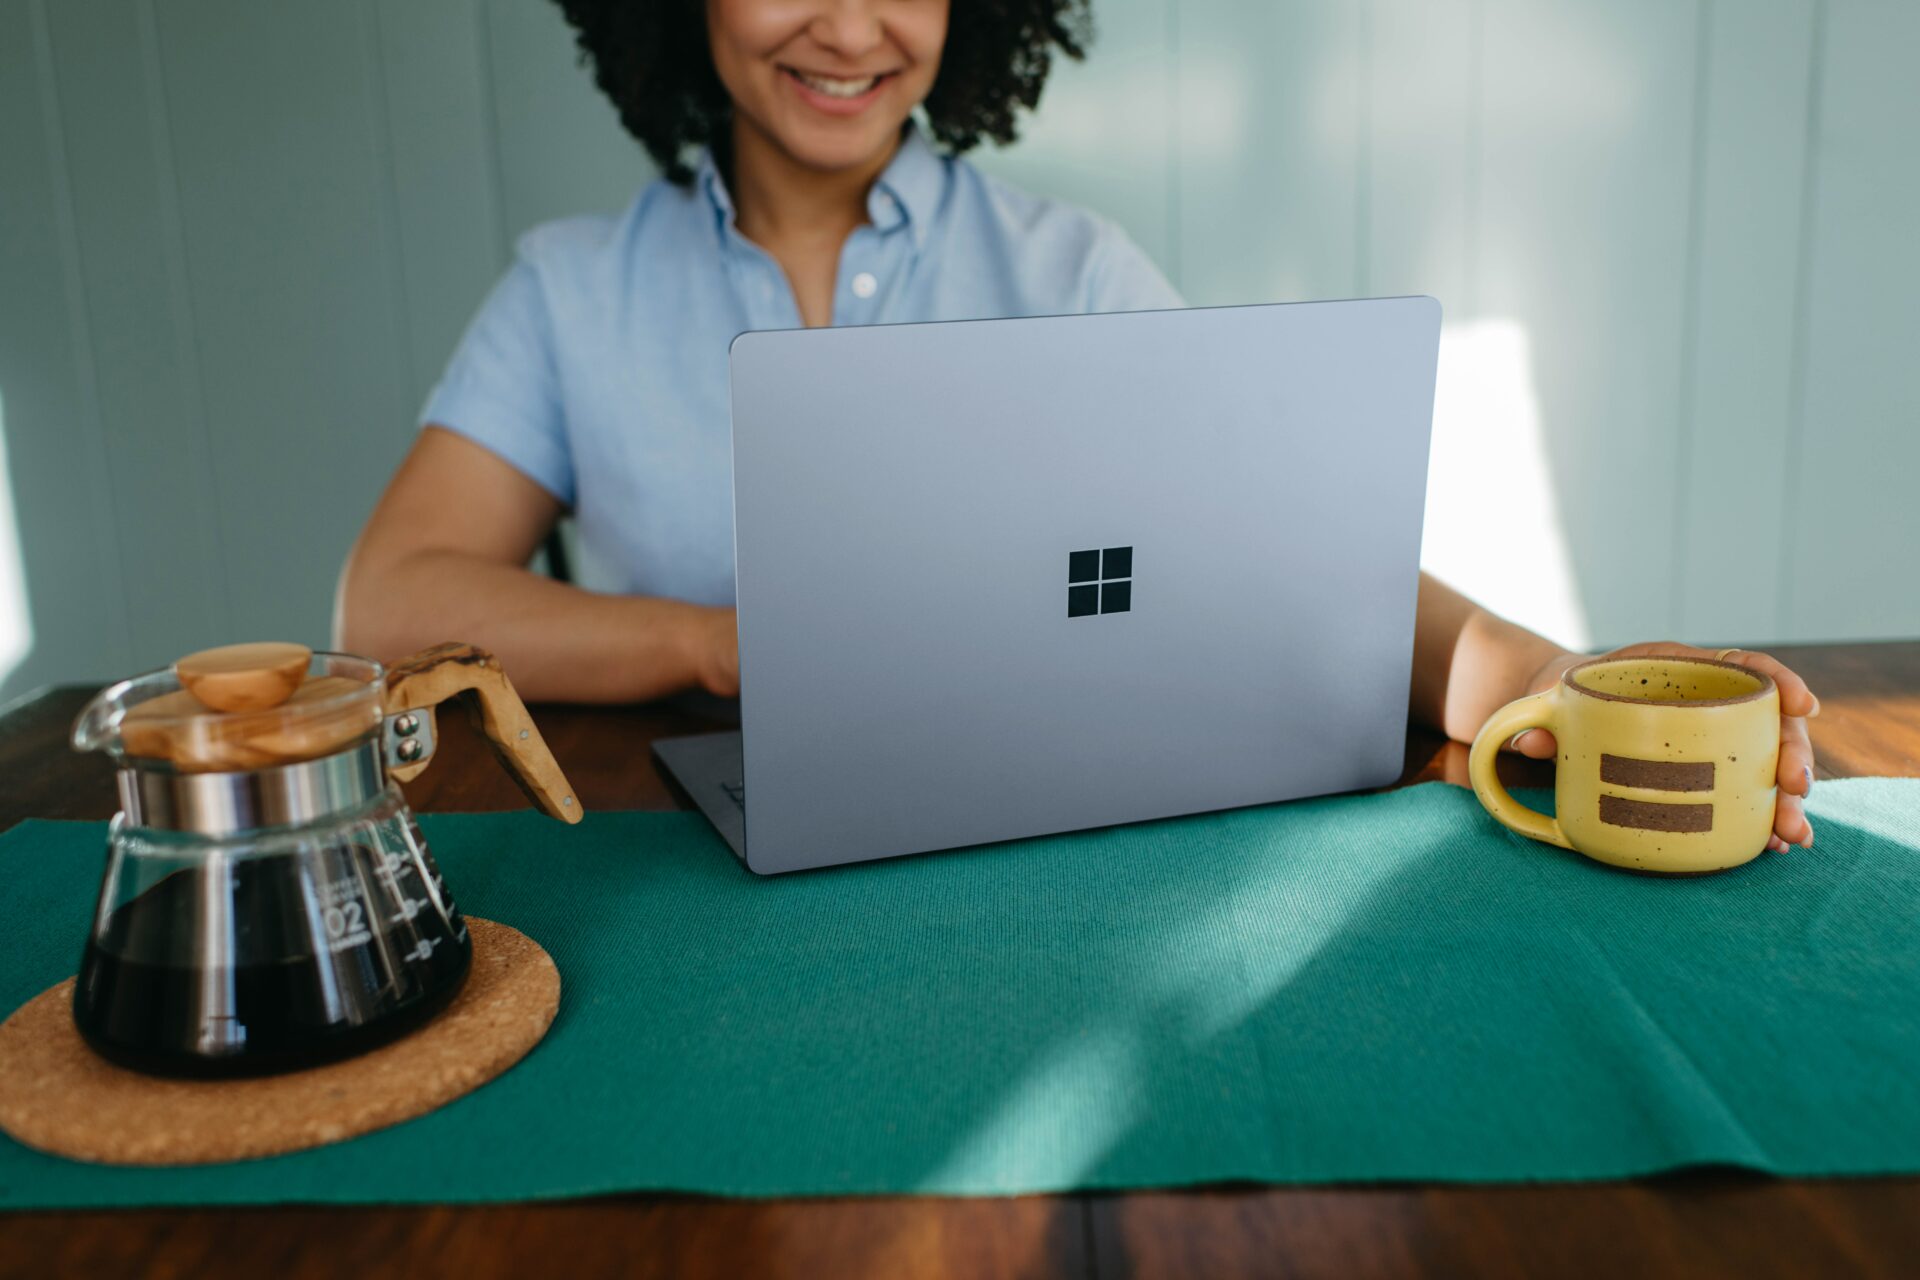 Smiling woman using Microsoft surface laptop holding coffee cup